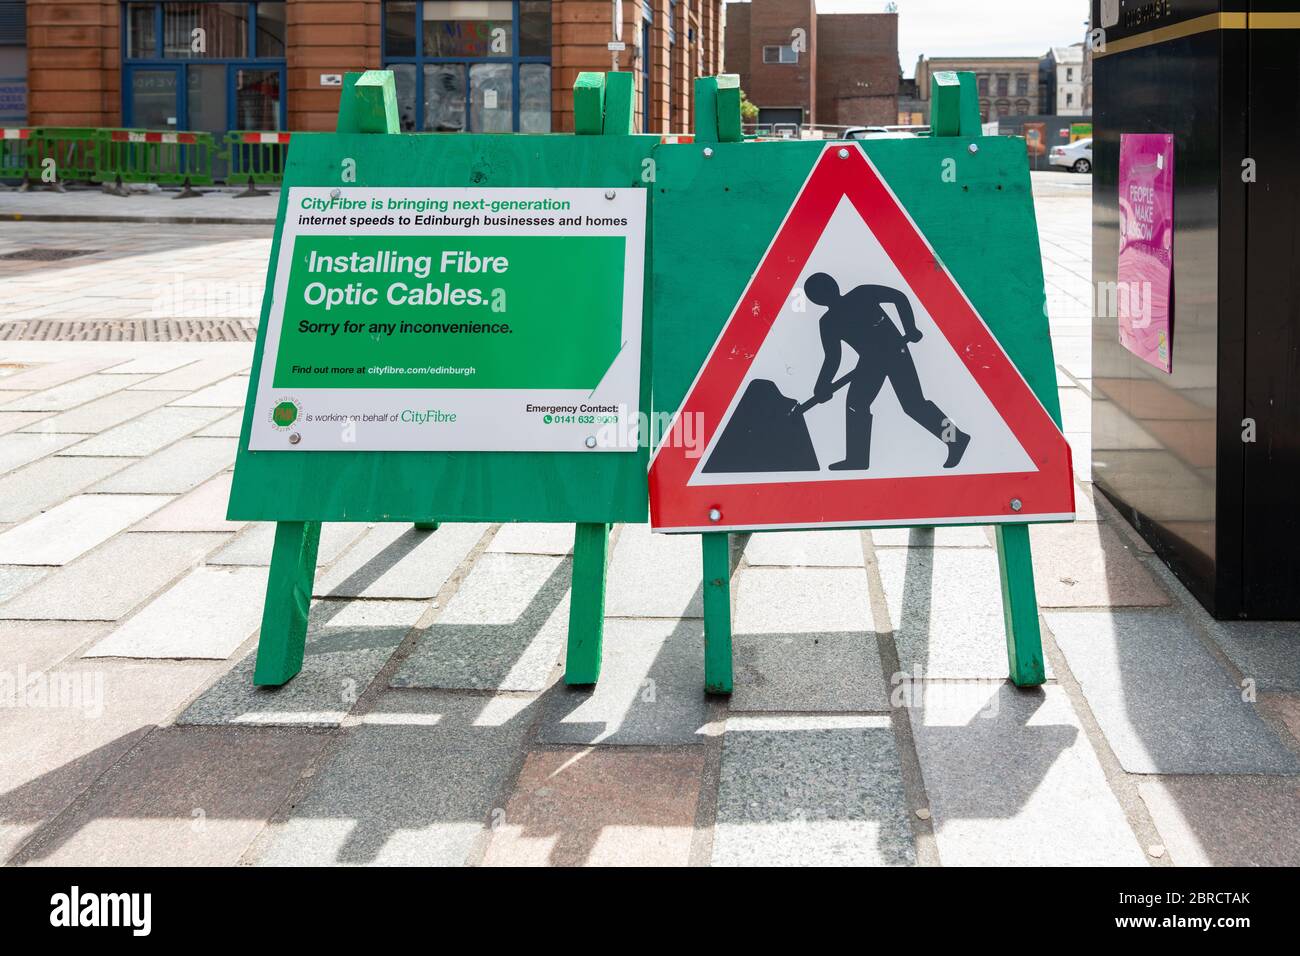 Installing Fibre Optic Cables road signs by city-fibre (mistakenly says Edinburgh on sign) - Glasgow, Scotland, UK Stock Photo